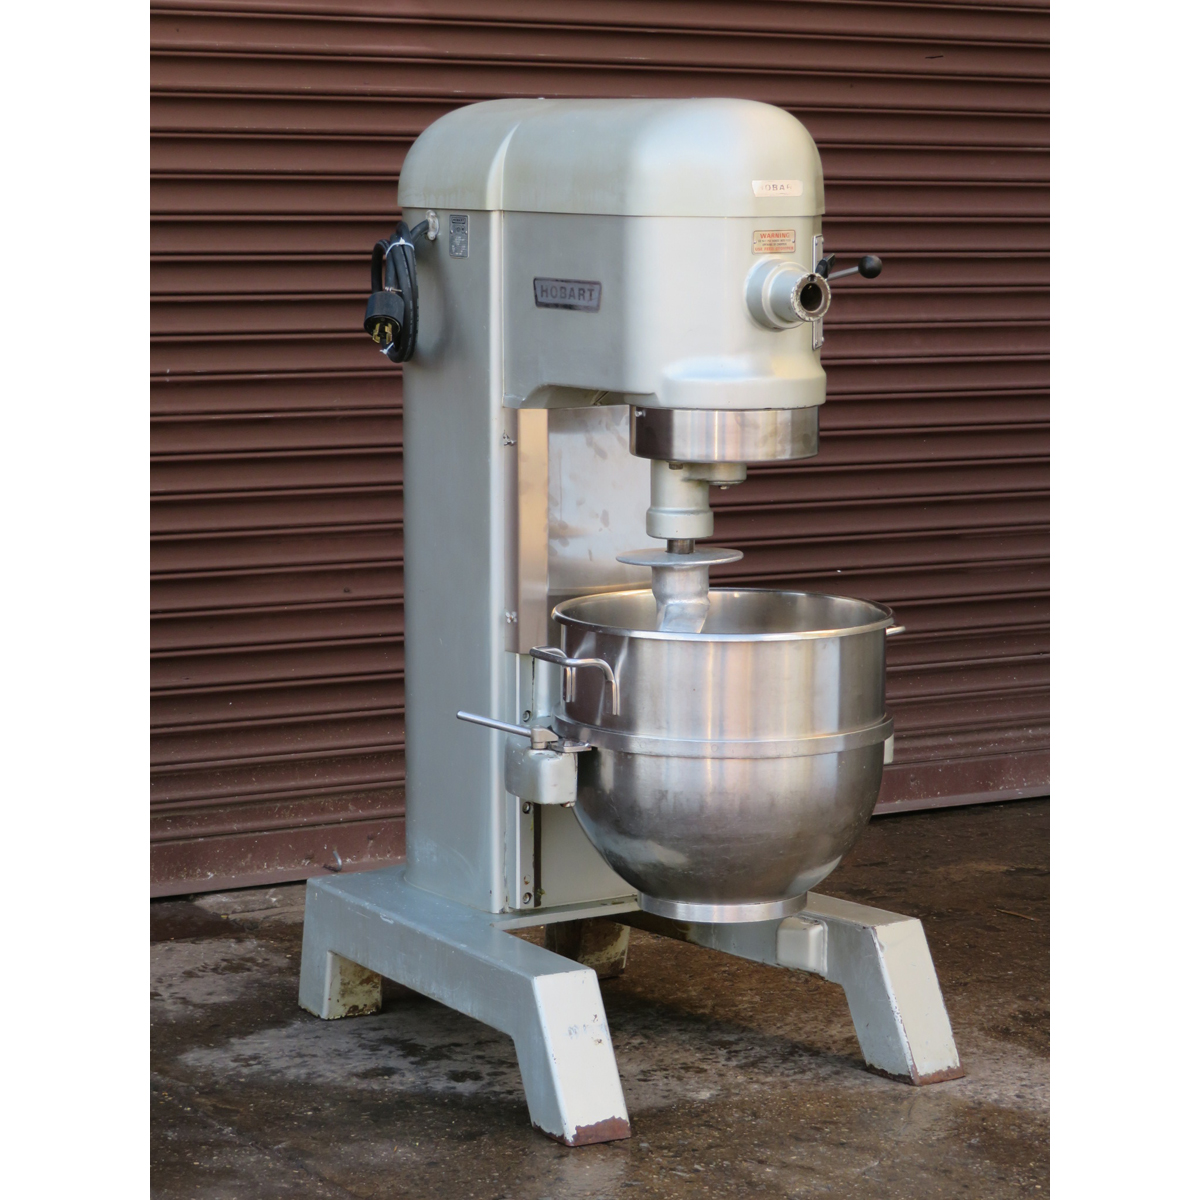 Hobart H600 60 Quart Mixer, Used Excellent Condition image 1